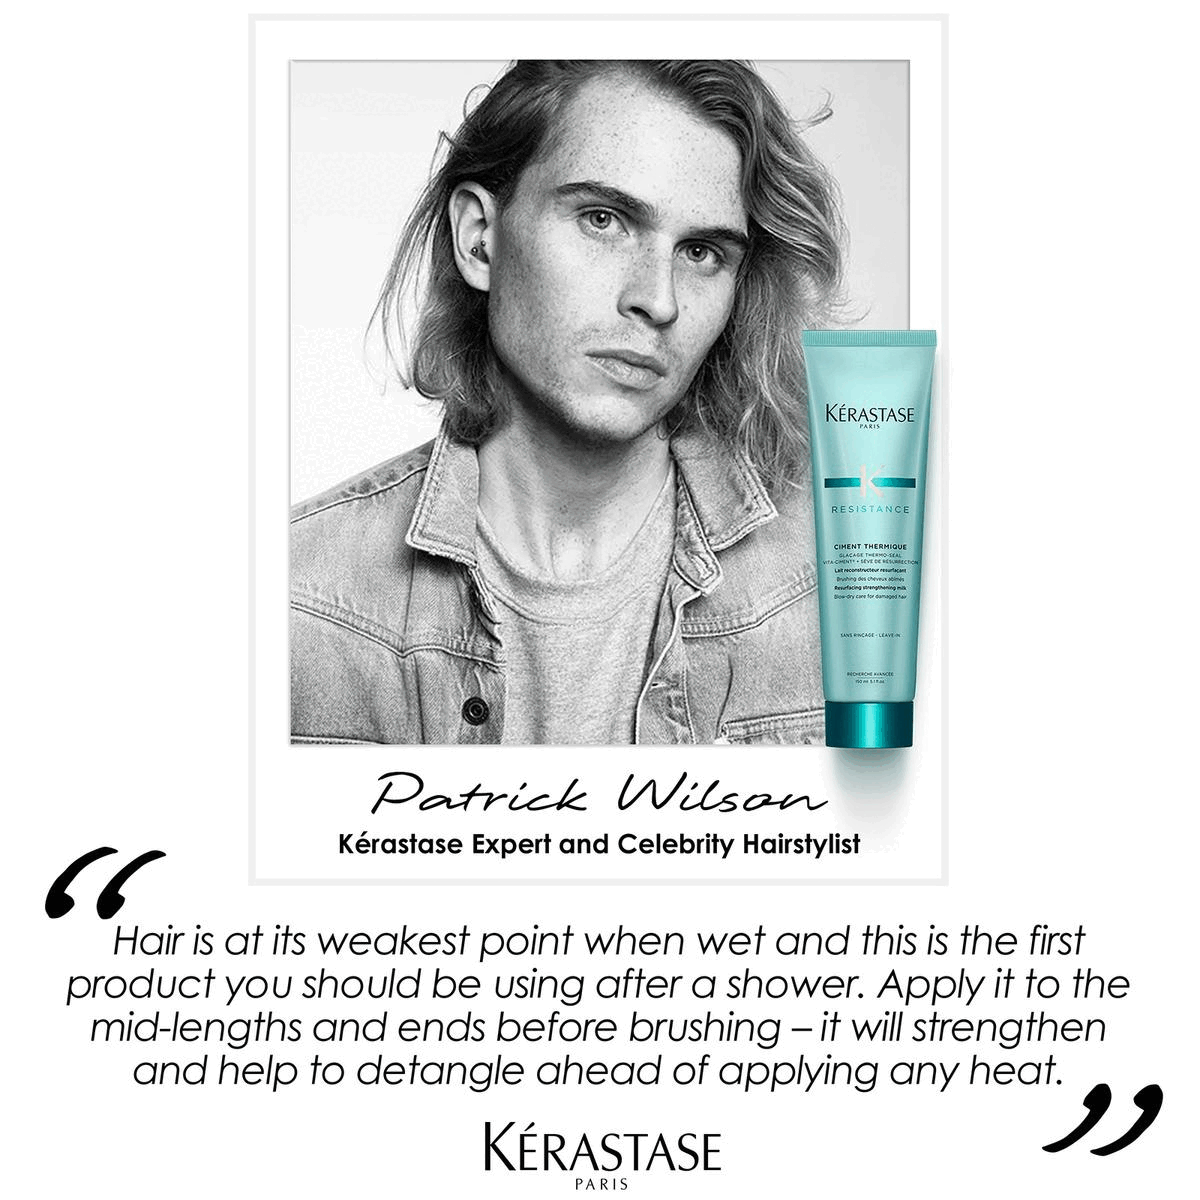 Image 1: Patrick Wilson Kérastase Expert and Celebrity Hairstylist. Hair is at its weakest point when wet and this is the first product you should be using after a shower. Apply it to the mid-lengths and ends before brushing - it will strengthen and help to detangle ahead of applying any heat. Image 2: Ceramide Resurrection Plant Sap Pro-Keratine